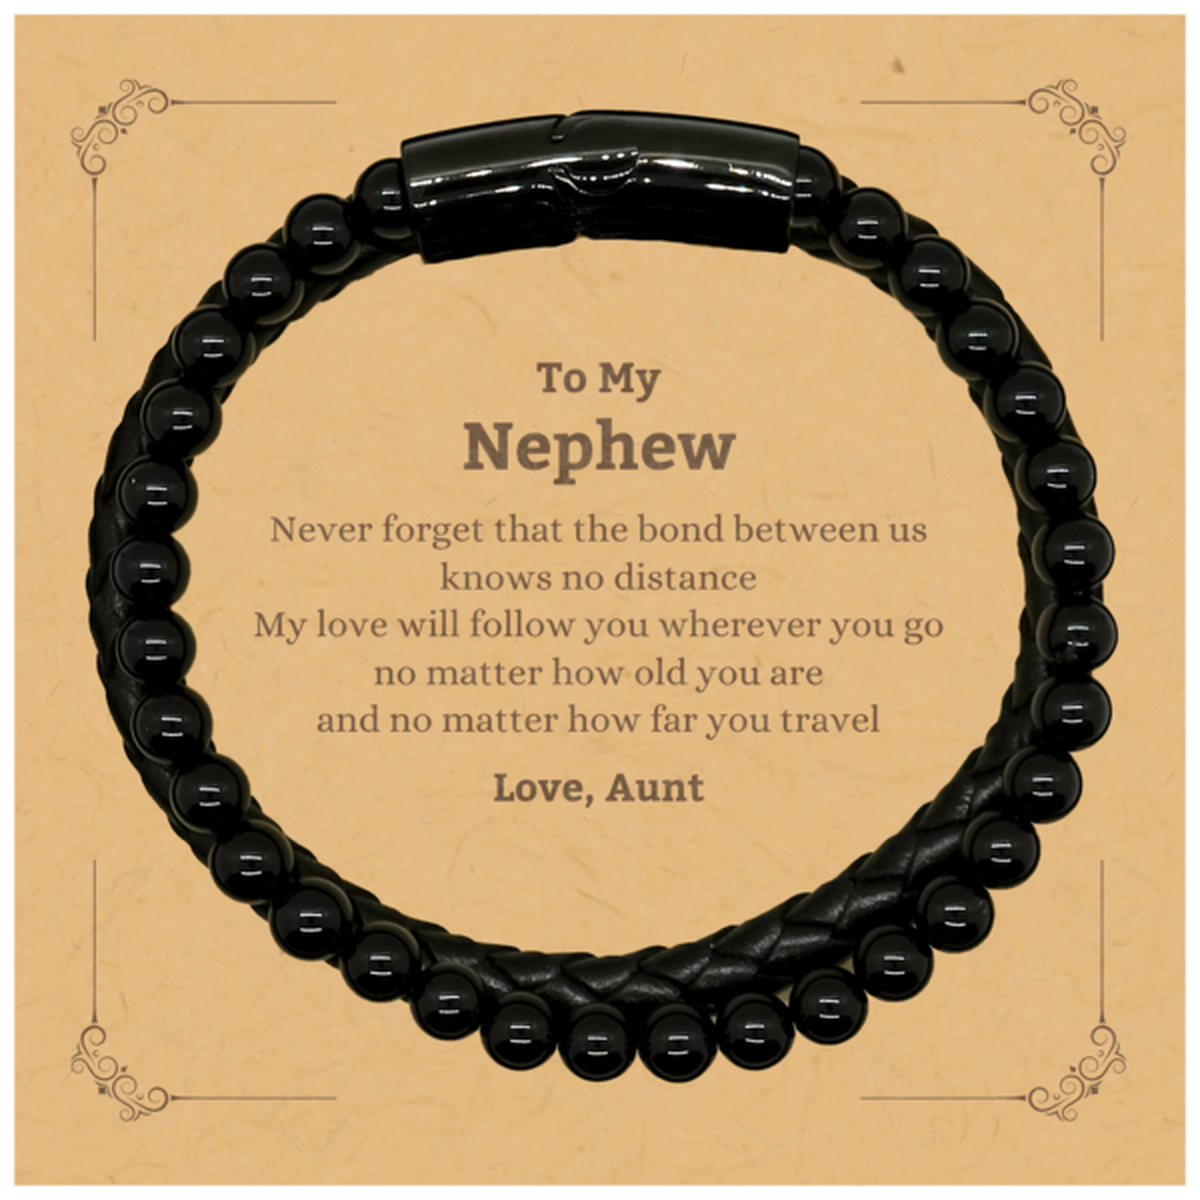 Nephew Birthday Gifts from Aunt, Adjustable Stone Leather Bracelets for Nephew Christmas Graduation Unique Gifts Nephew Never forget that the bond between us knows no distance. Love, Aunt